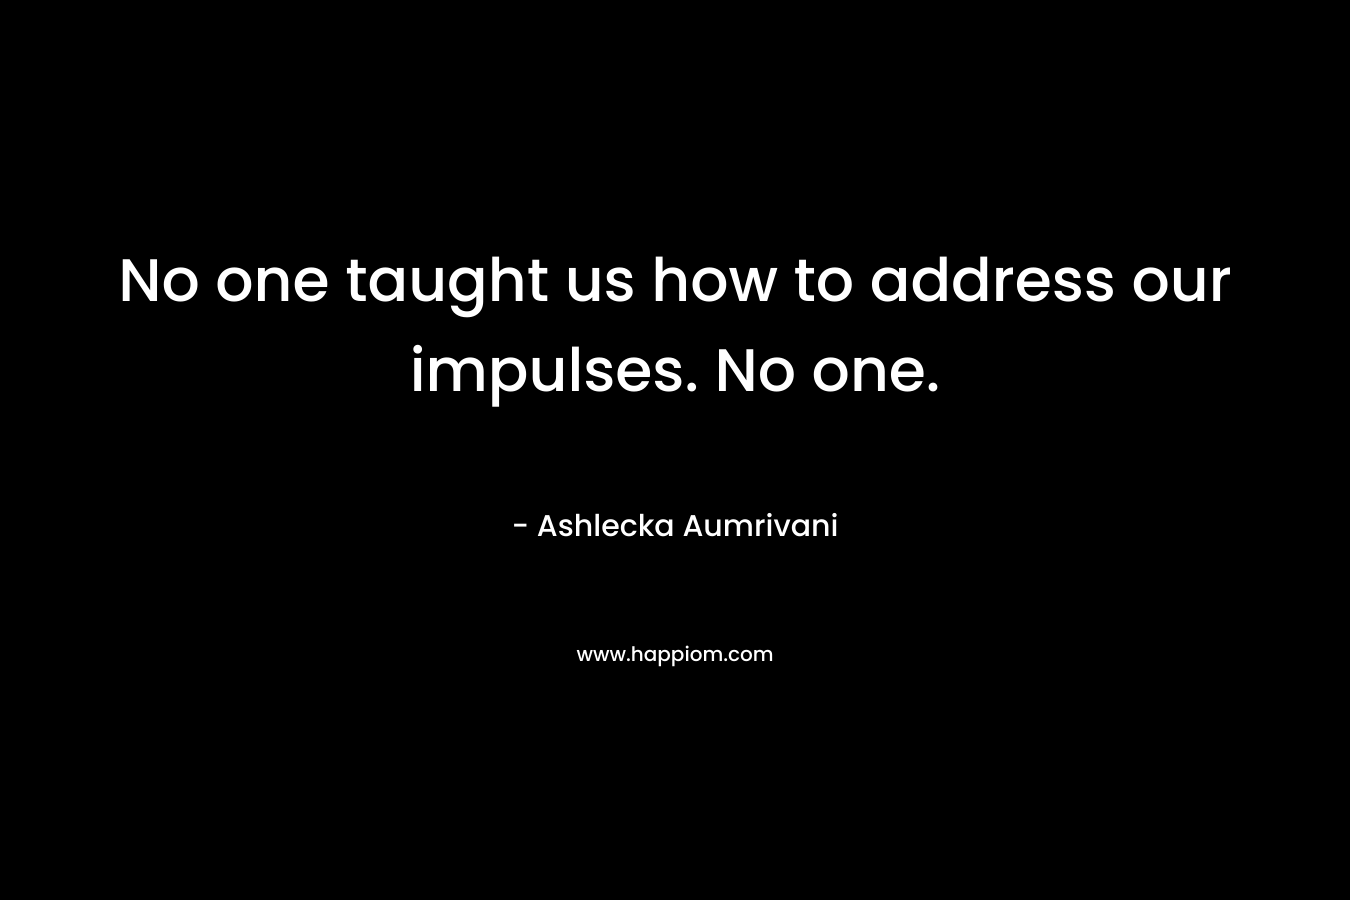 No one taught us how to address our impulses. No one. – Ashlecka Aumrivani